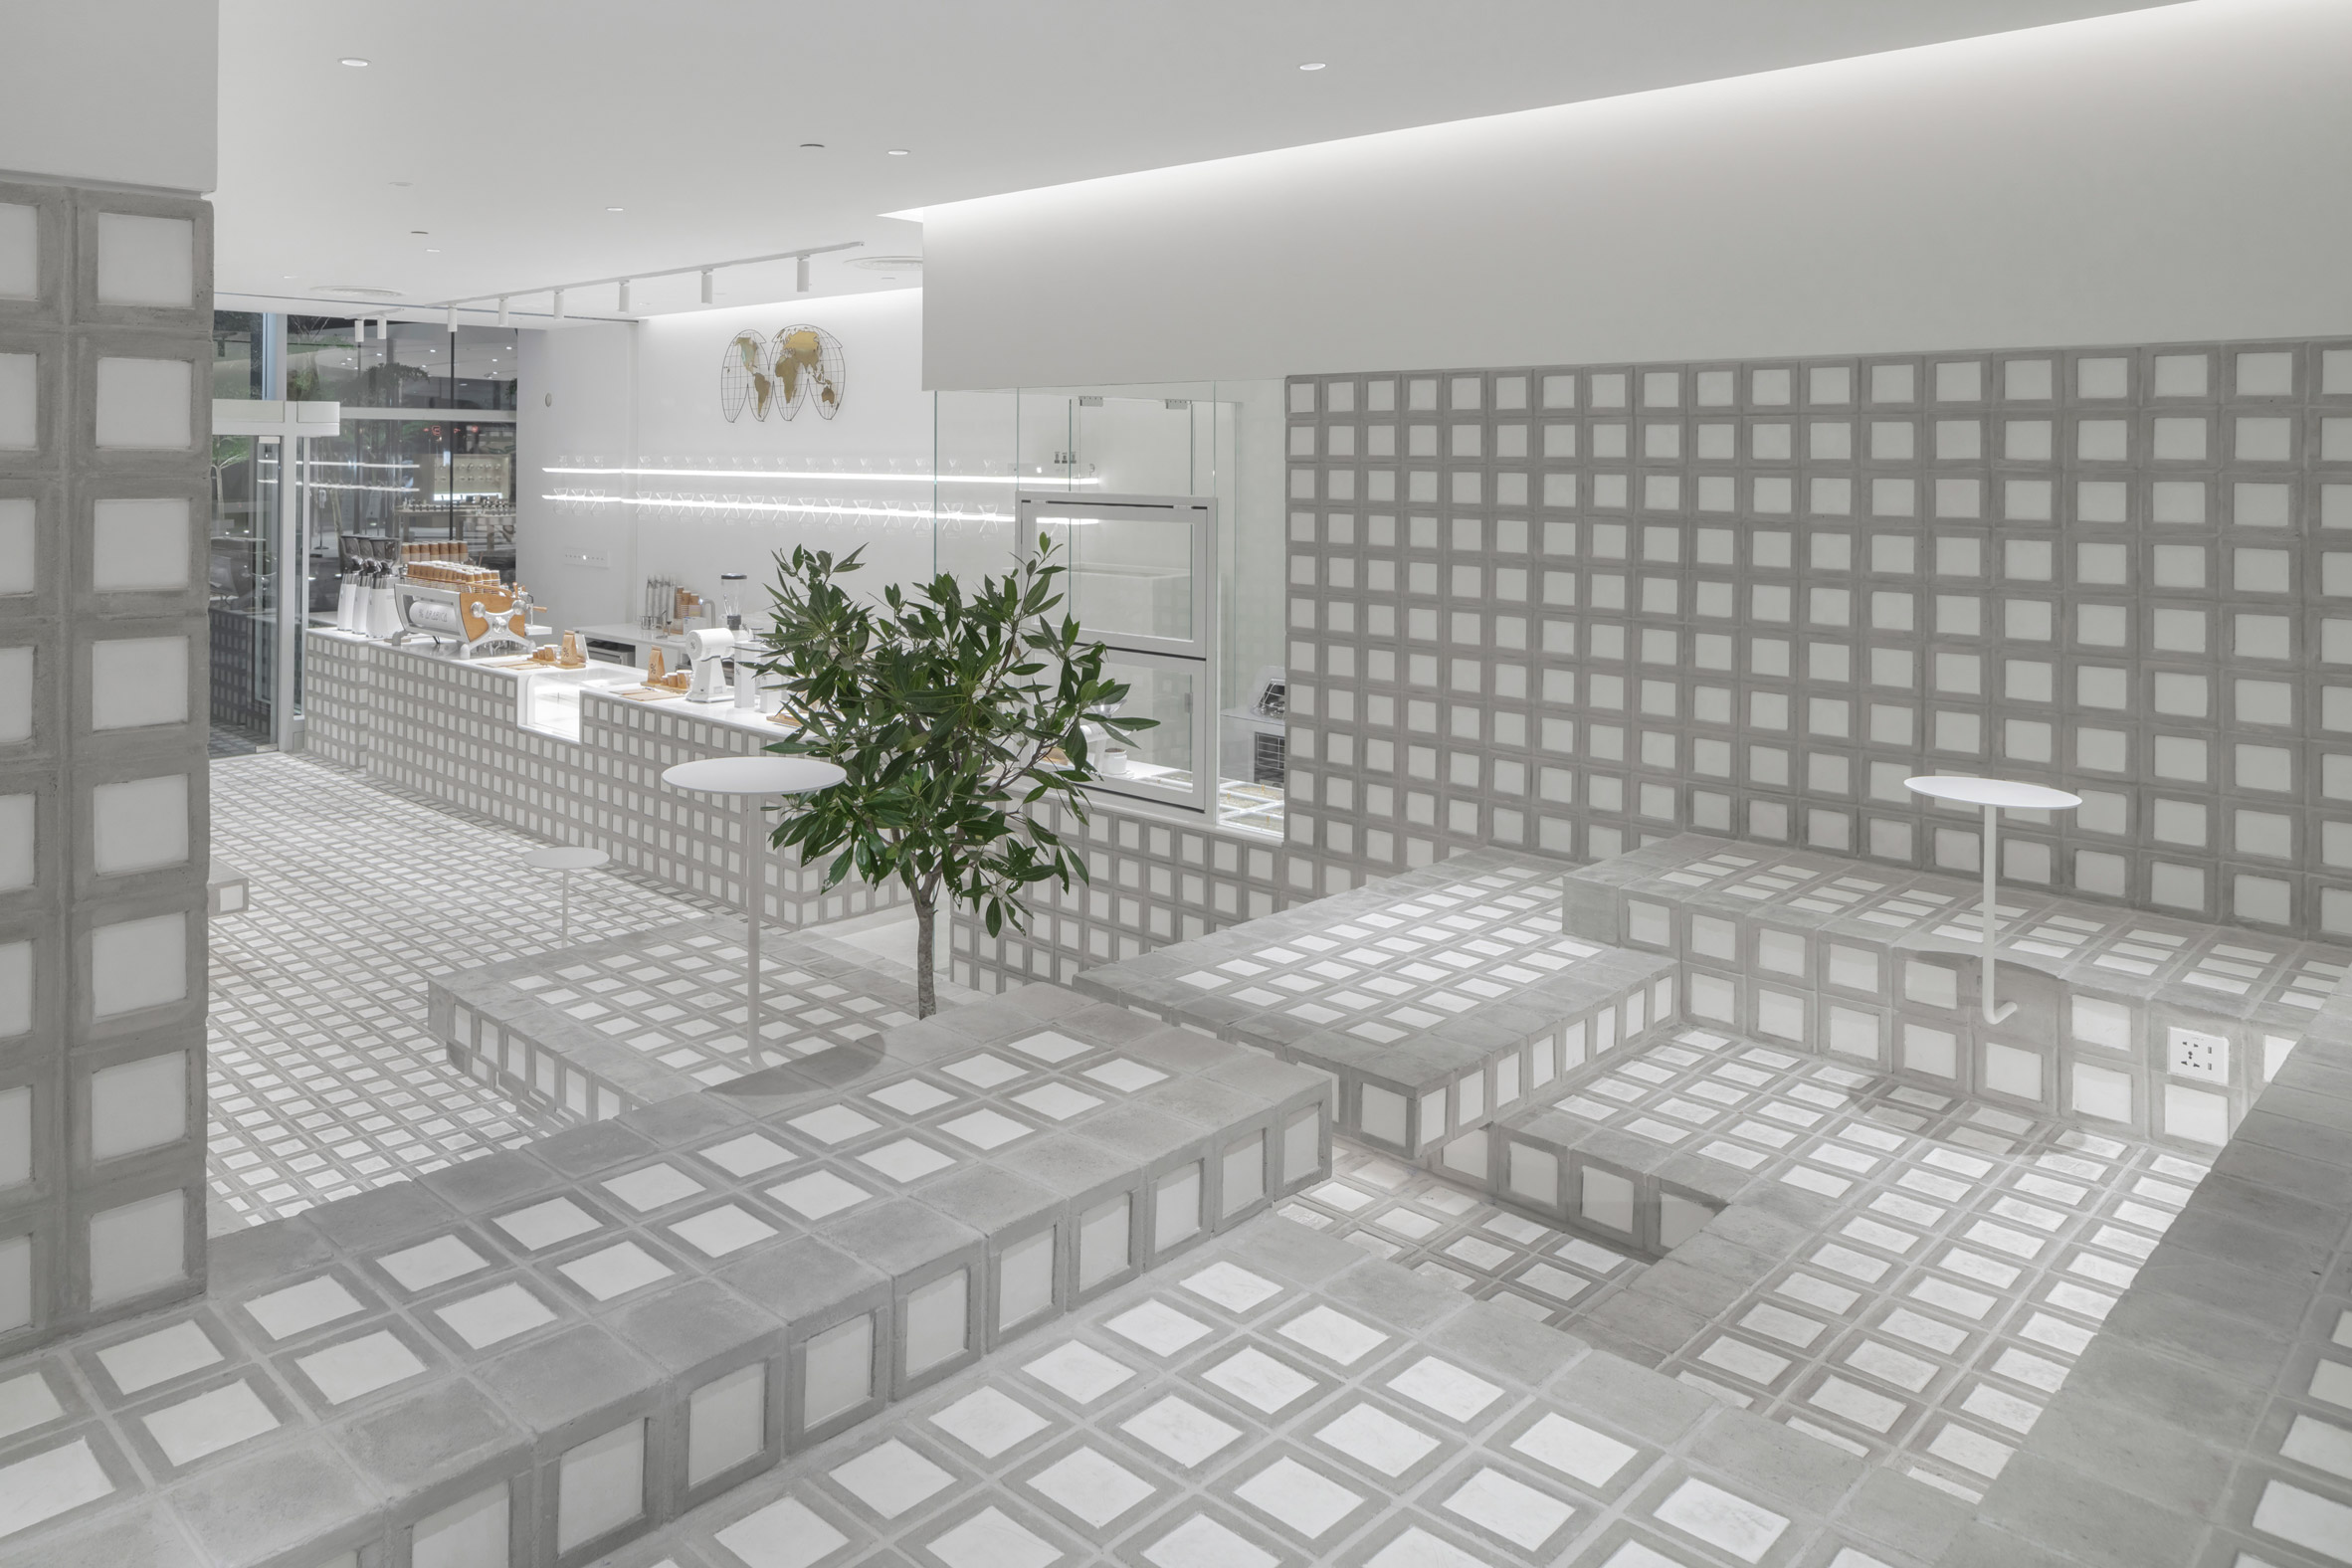 Grey and white seating area in cafe interior by Precht